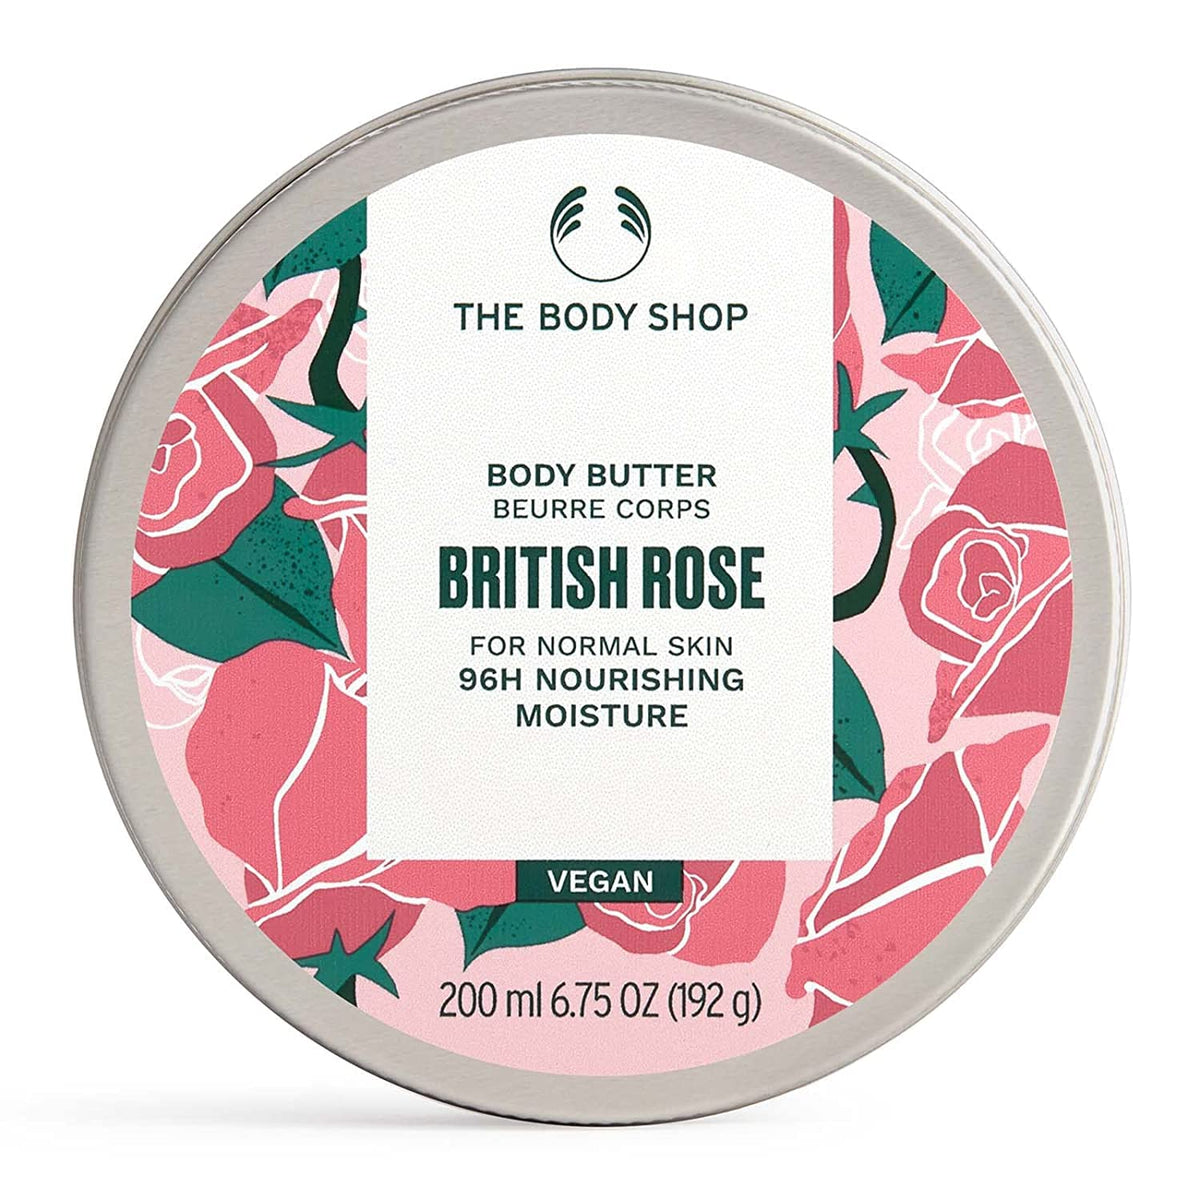 The Body Shop British Rose Body Butter (200ml) The Body Shop